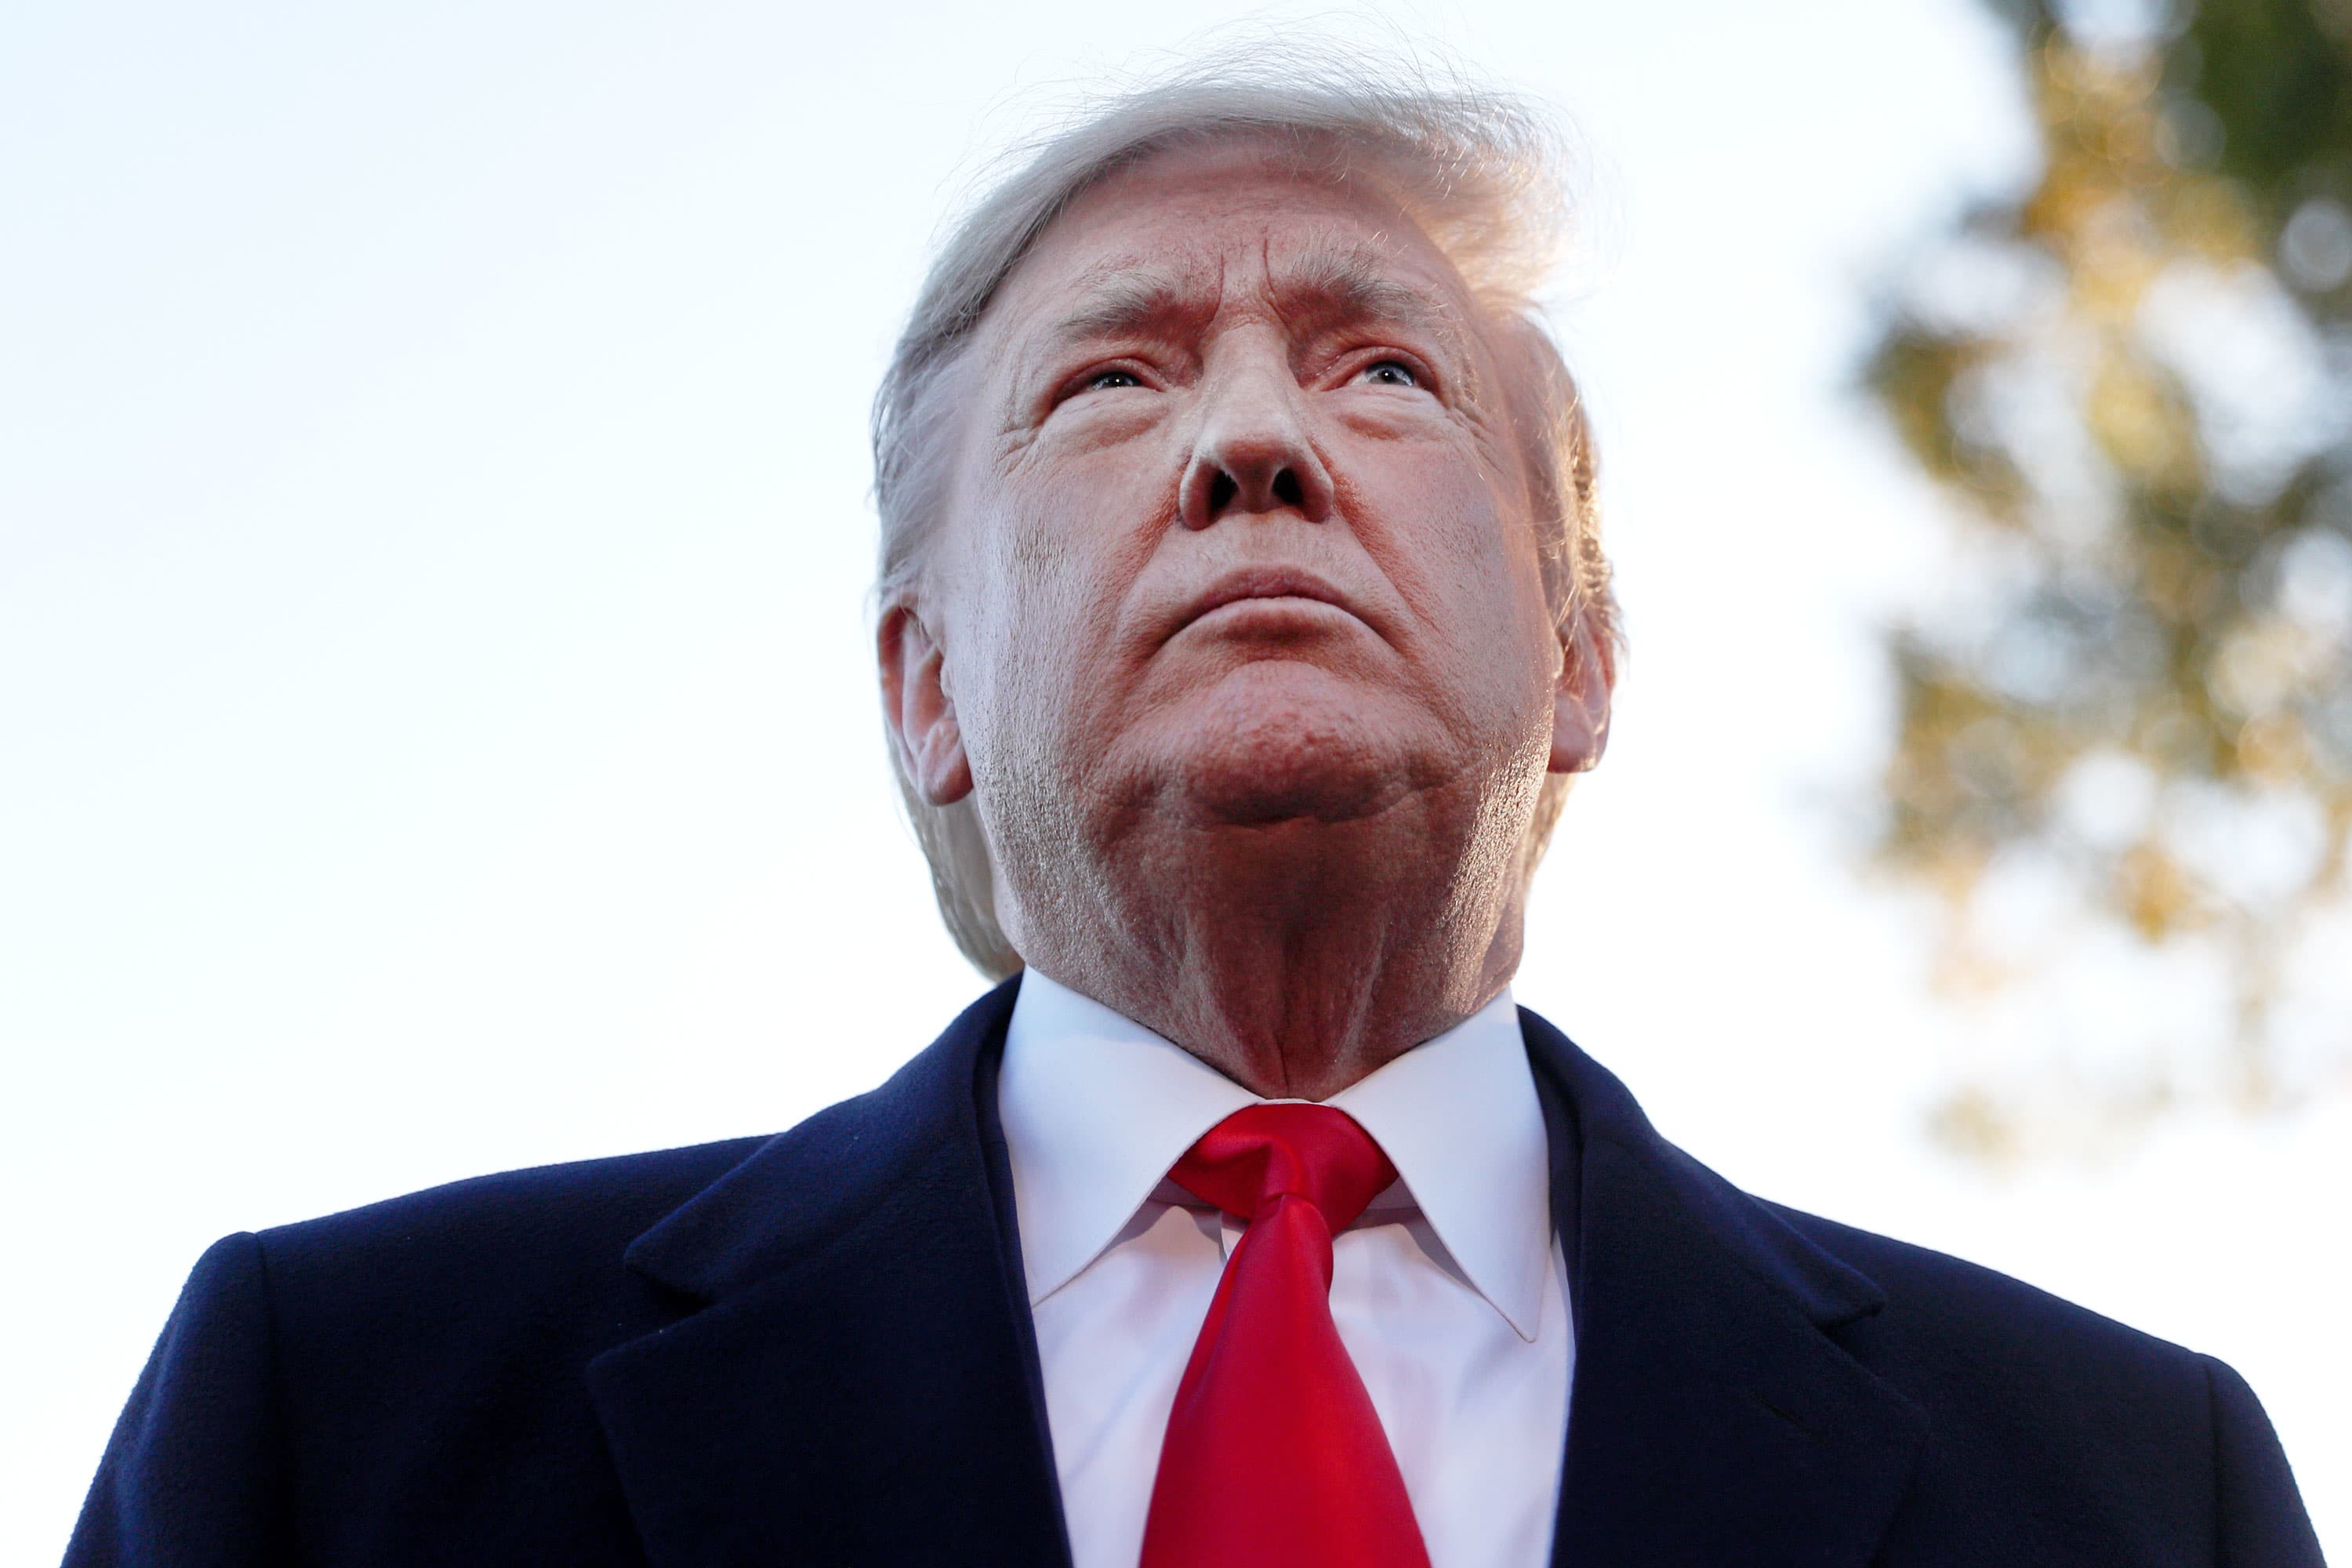 Trump rages at Republican Party leaders, even when advisers encourage him to focus attacks on Biden